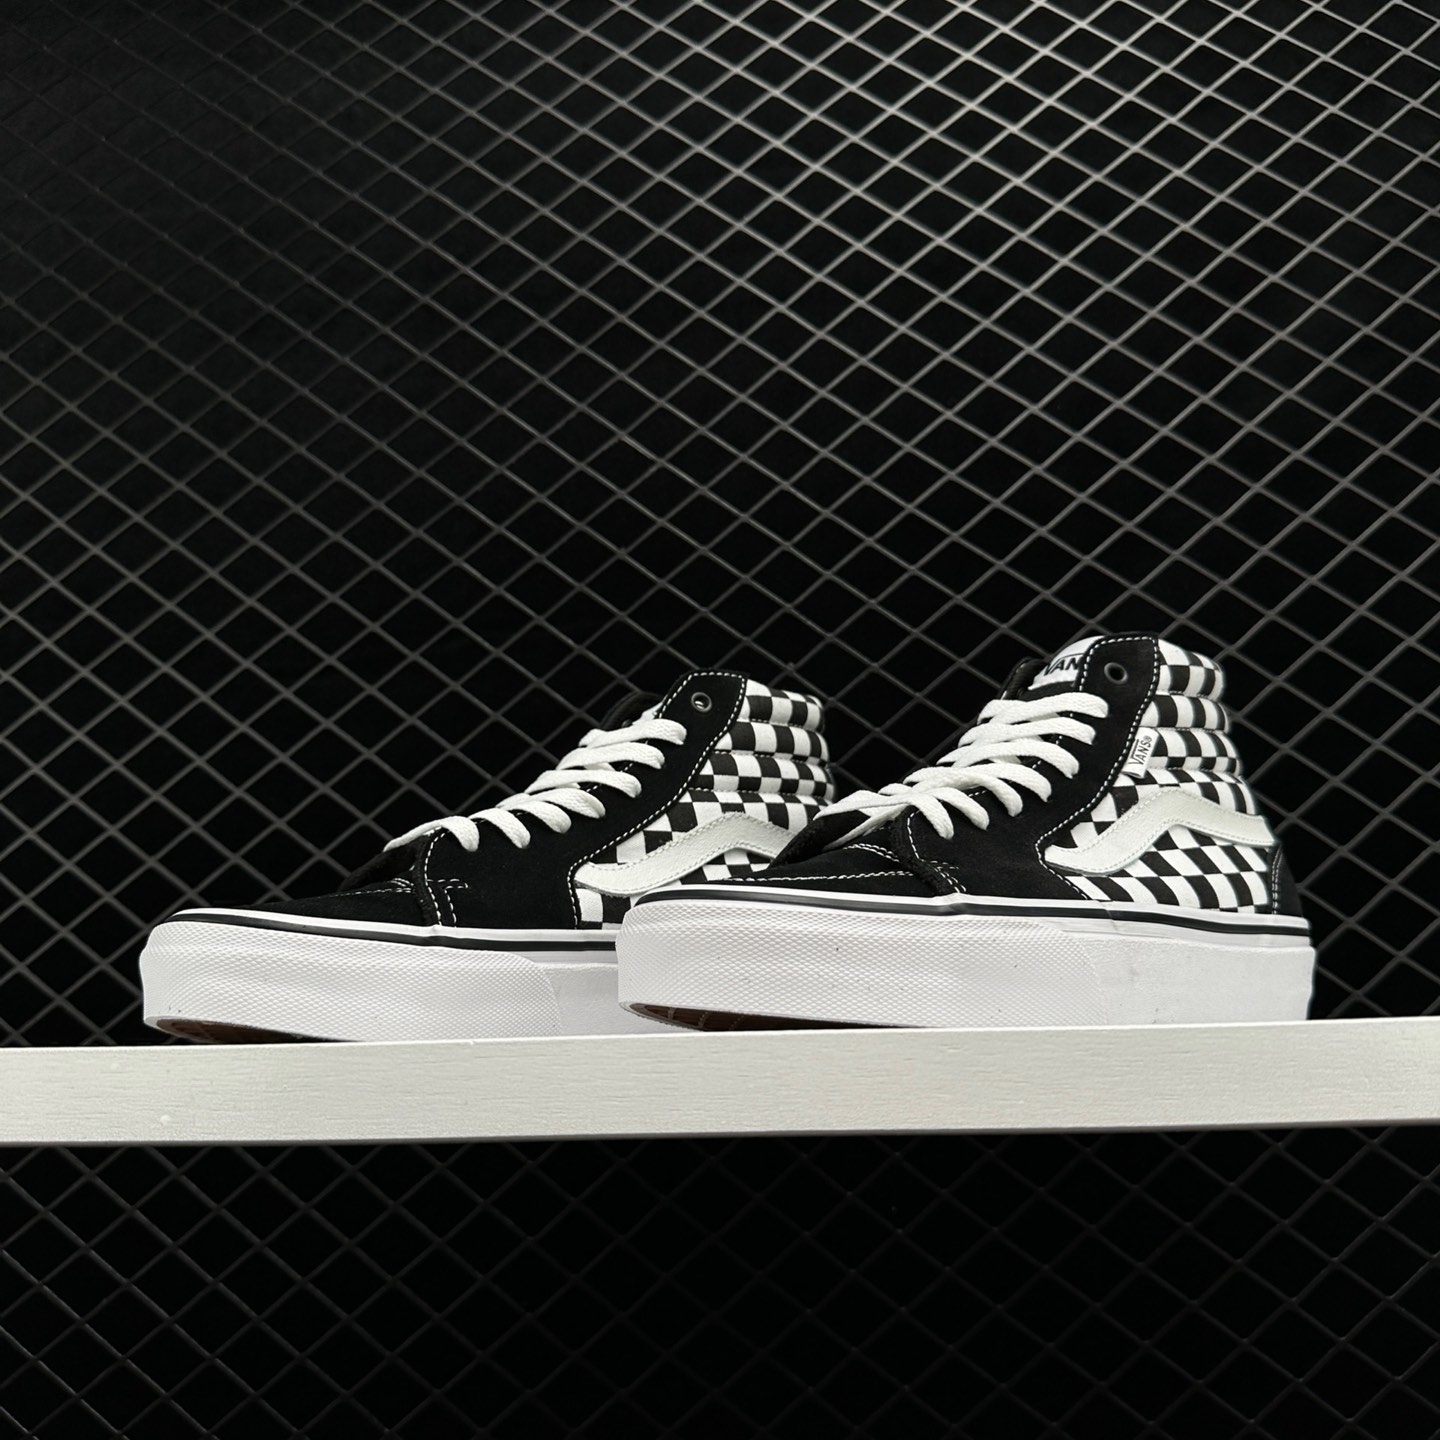 Vans Filmore High-Top Sneakers Black White - Stylish and Comfortable Footwear